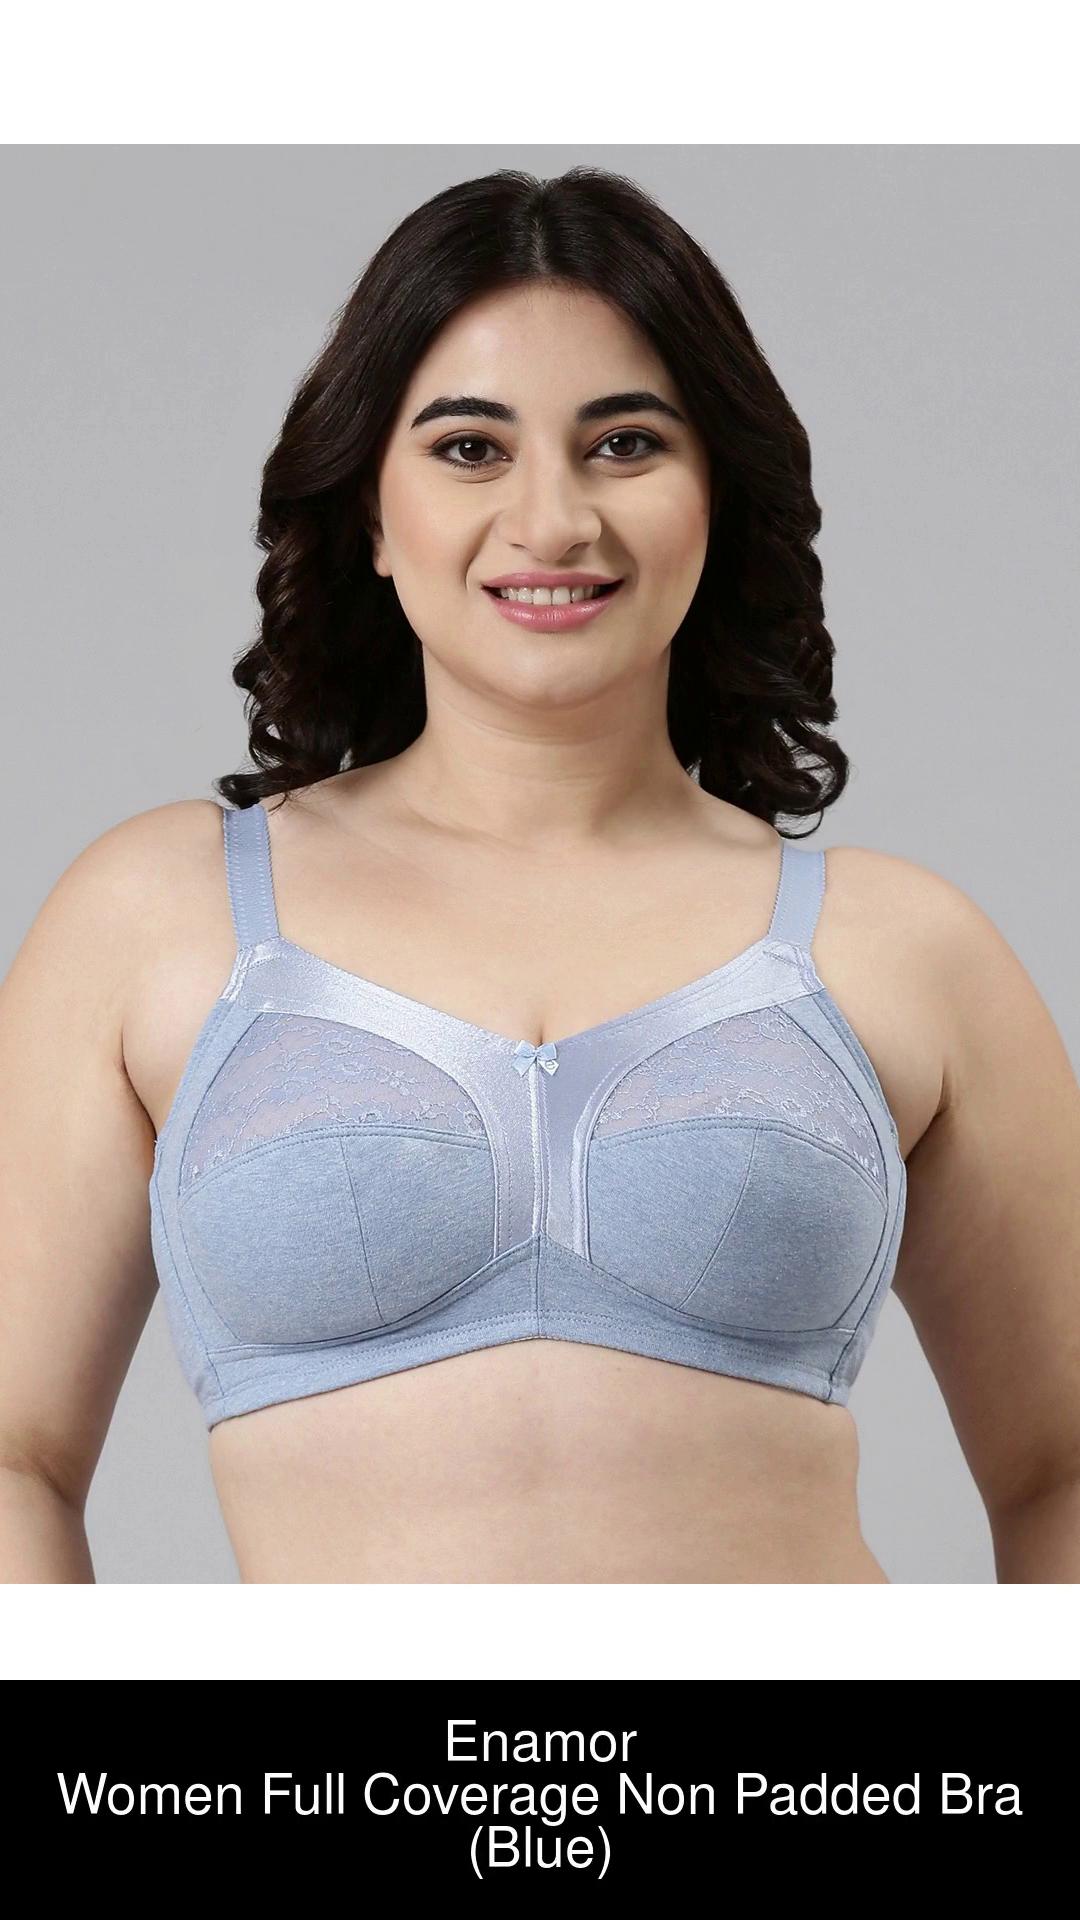 Enamor Full Coverage, Wirefree A014 Super Contouring M-frame Full Support  Fab-Cool Women Full Coverage Non Padded Bra - Buy Enamor Full Coverage,  Wirefree A014 Super Contouring M-frame Full Support Fab-Cool Women Full